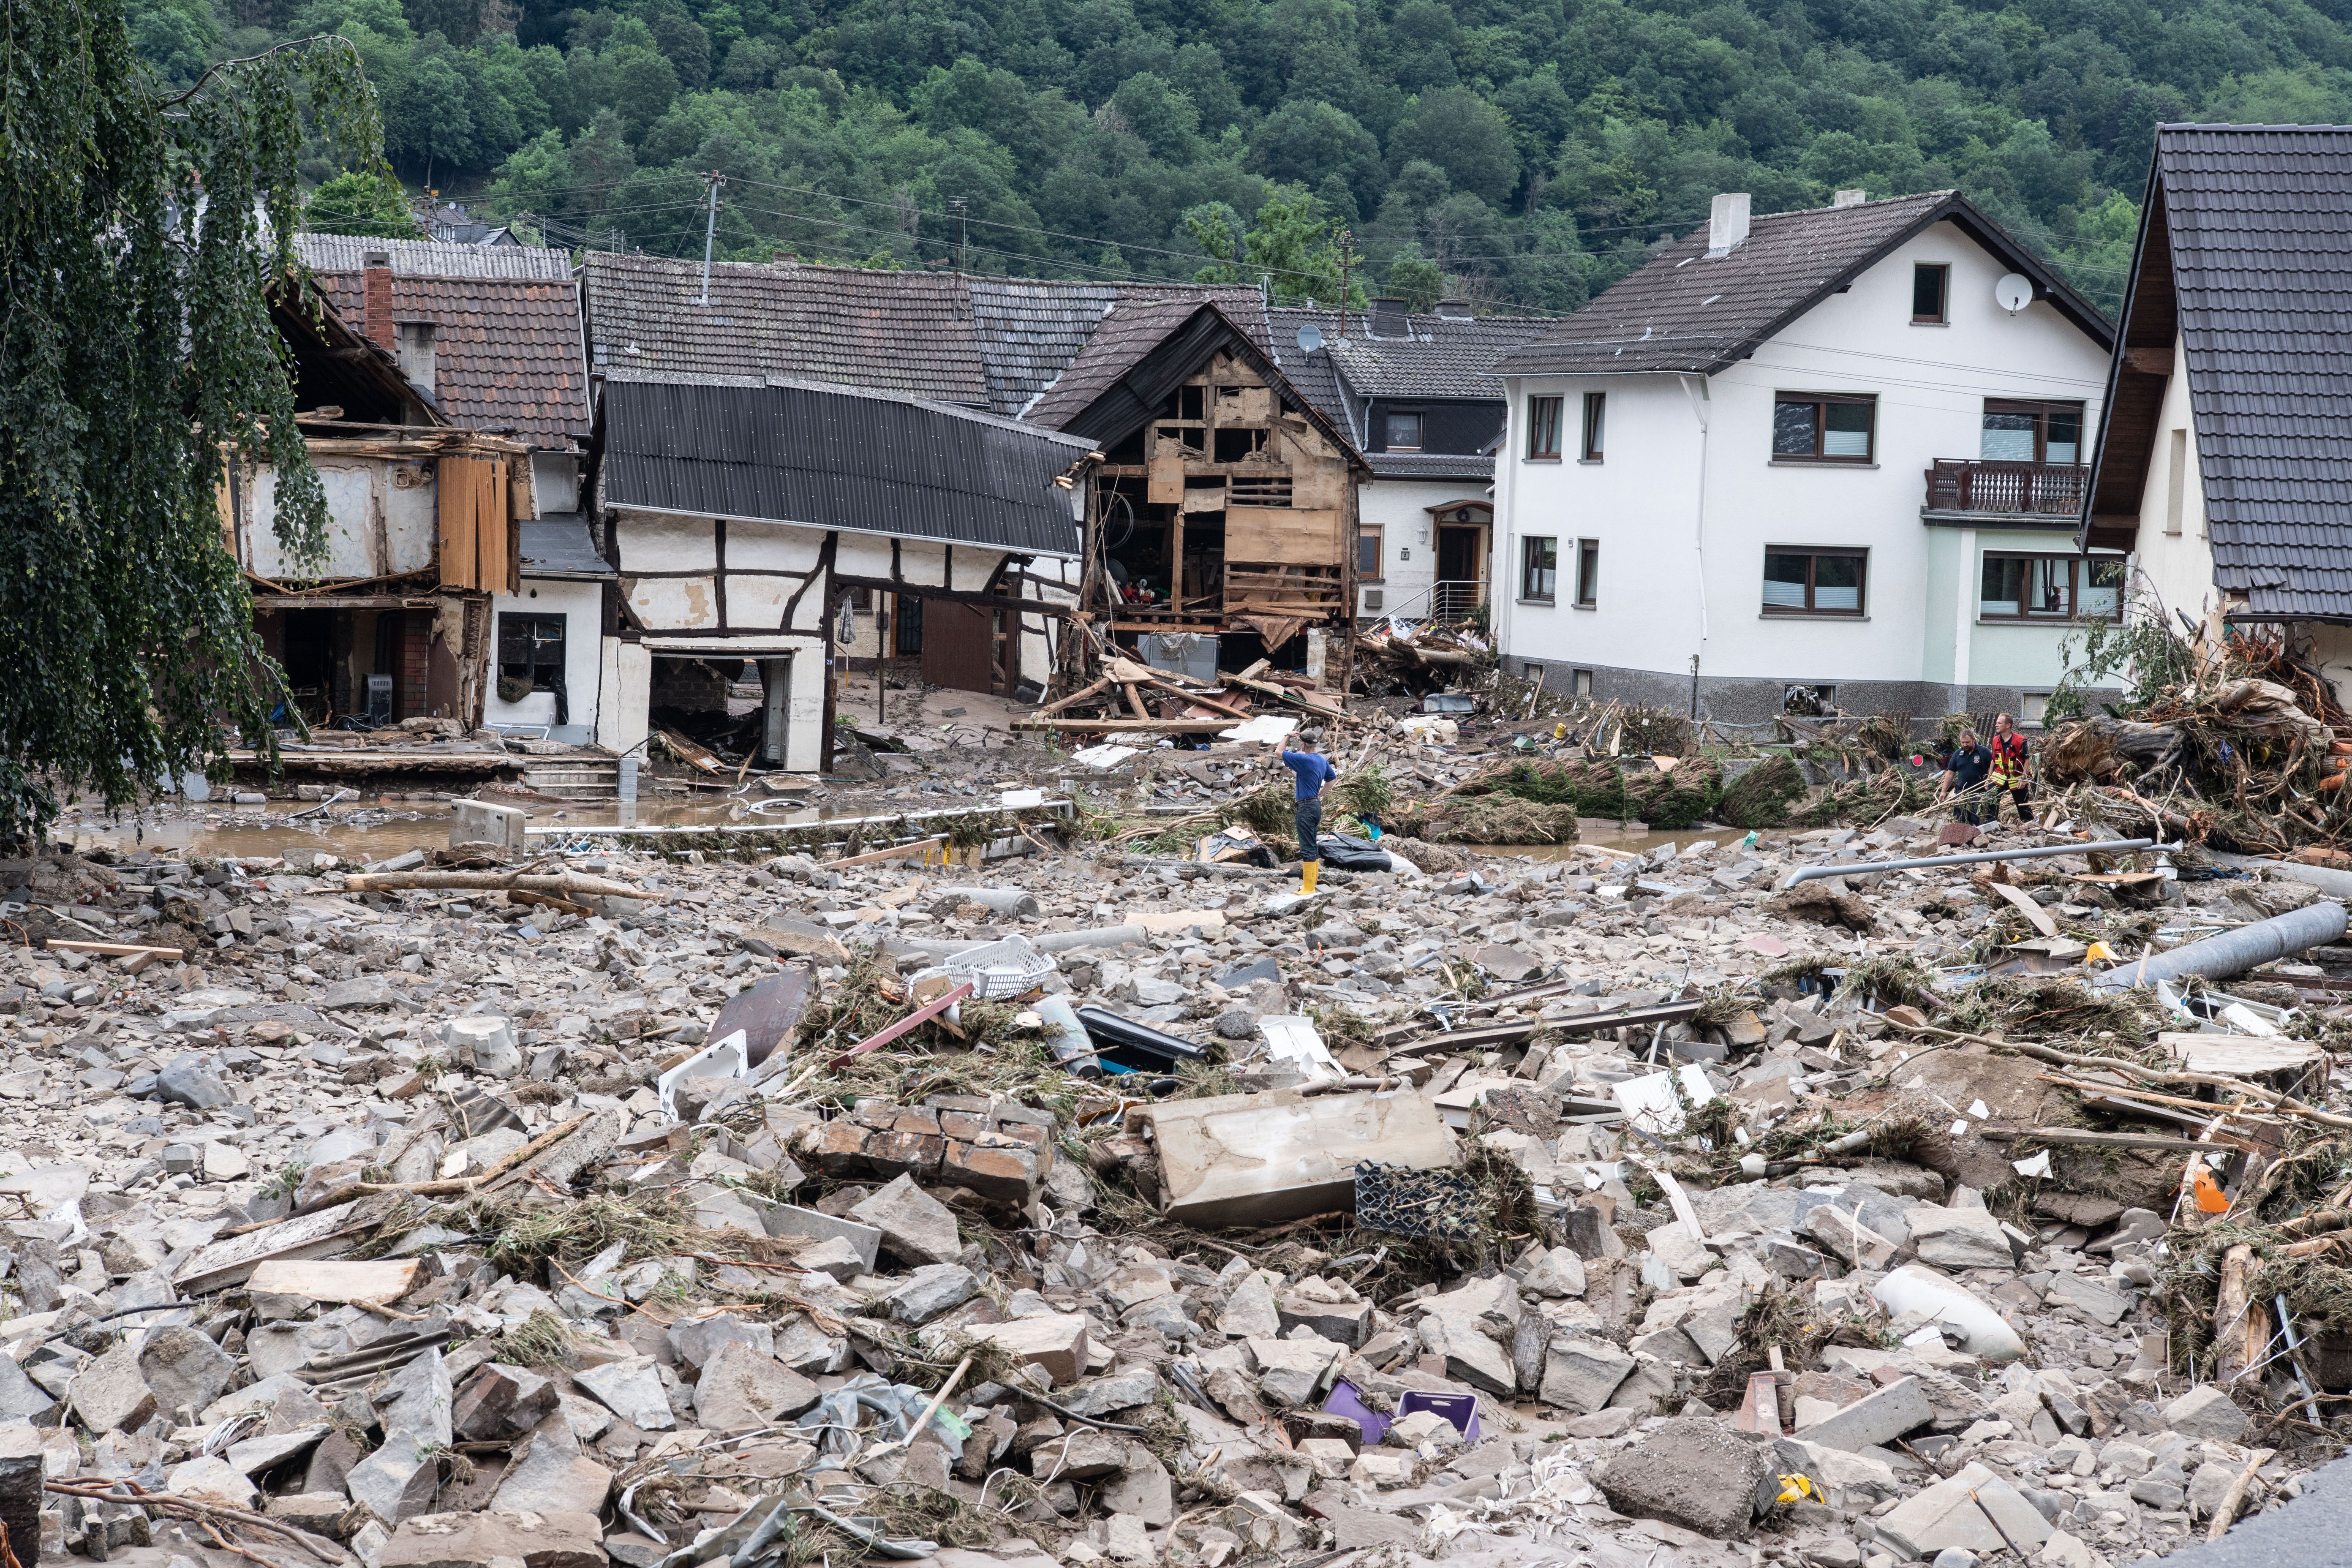 Image showing destruction in Rhineland-Palatinate, Schuld from flooding.